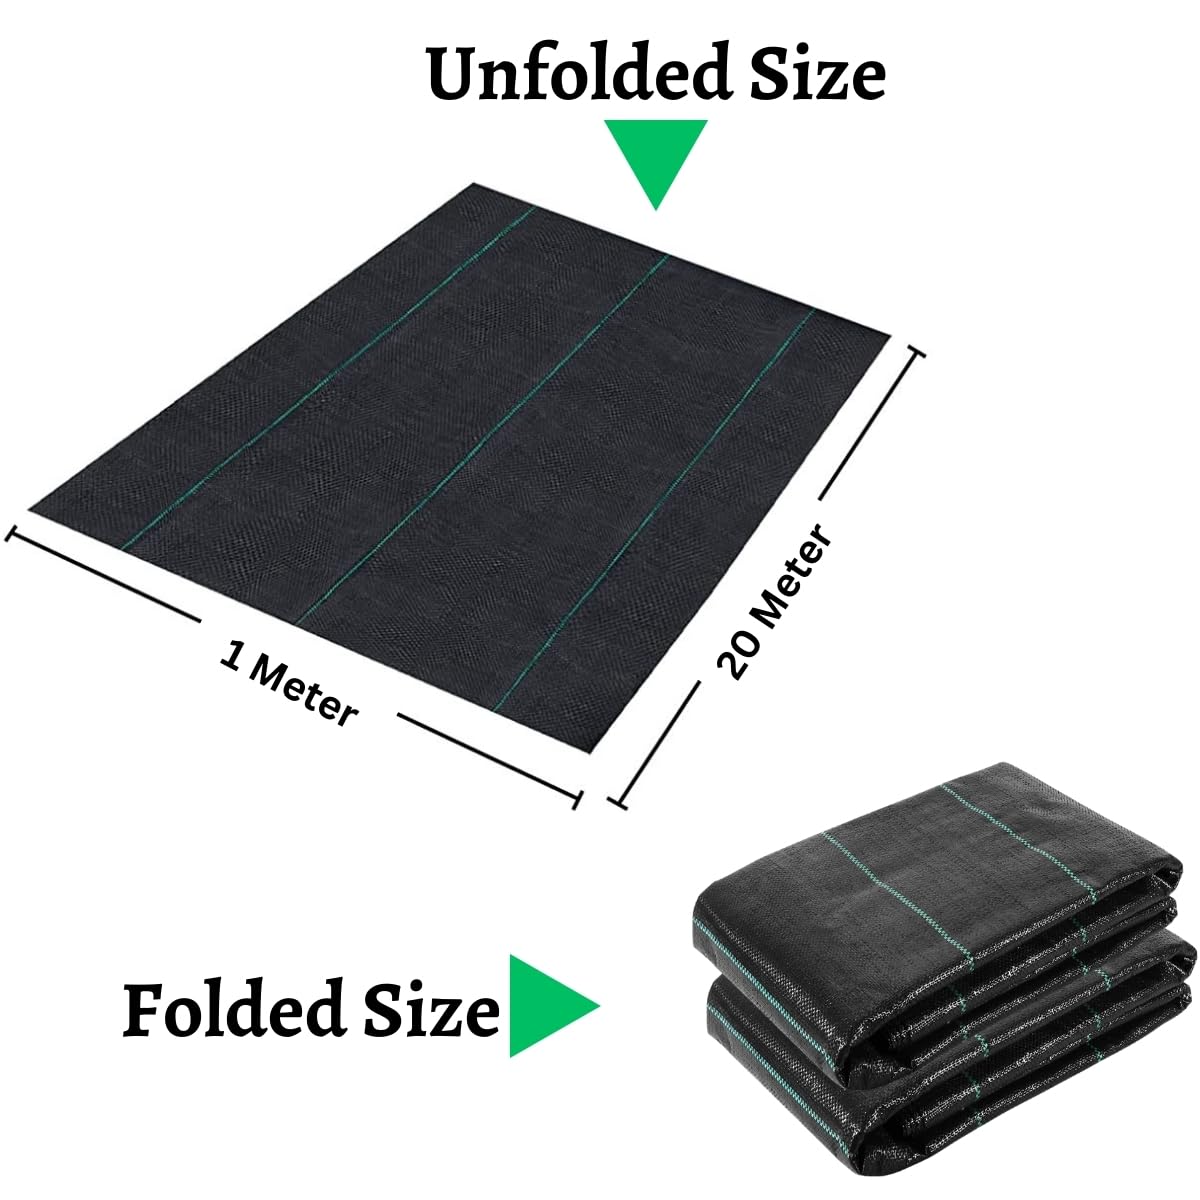 Singhal Premium Garden Weed Control Barrier Sheet Mat 1 Meter x 20 Meter, Landscape Fabric 110 GSM Heavy Duty Weed Block Gardening Mat for Gardens, Agriculture, Outdoor Projects (Black)